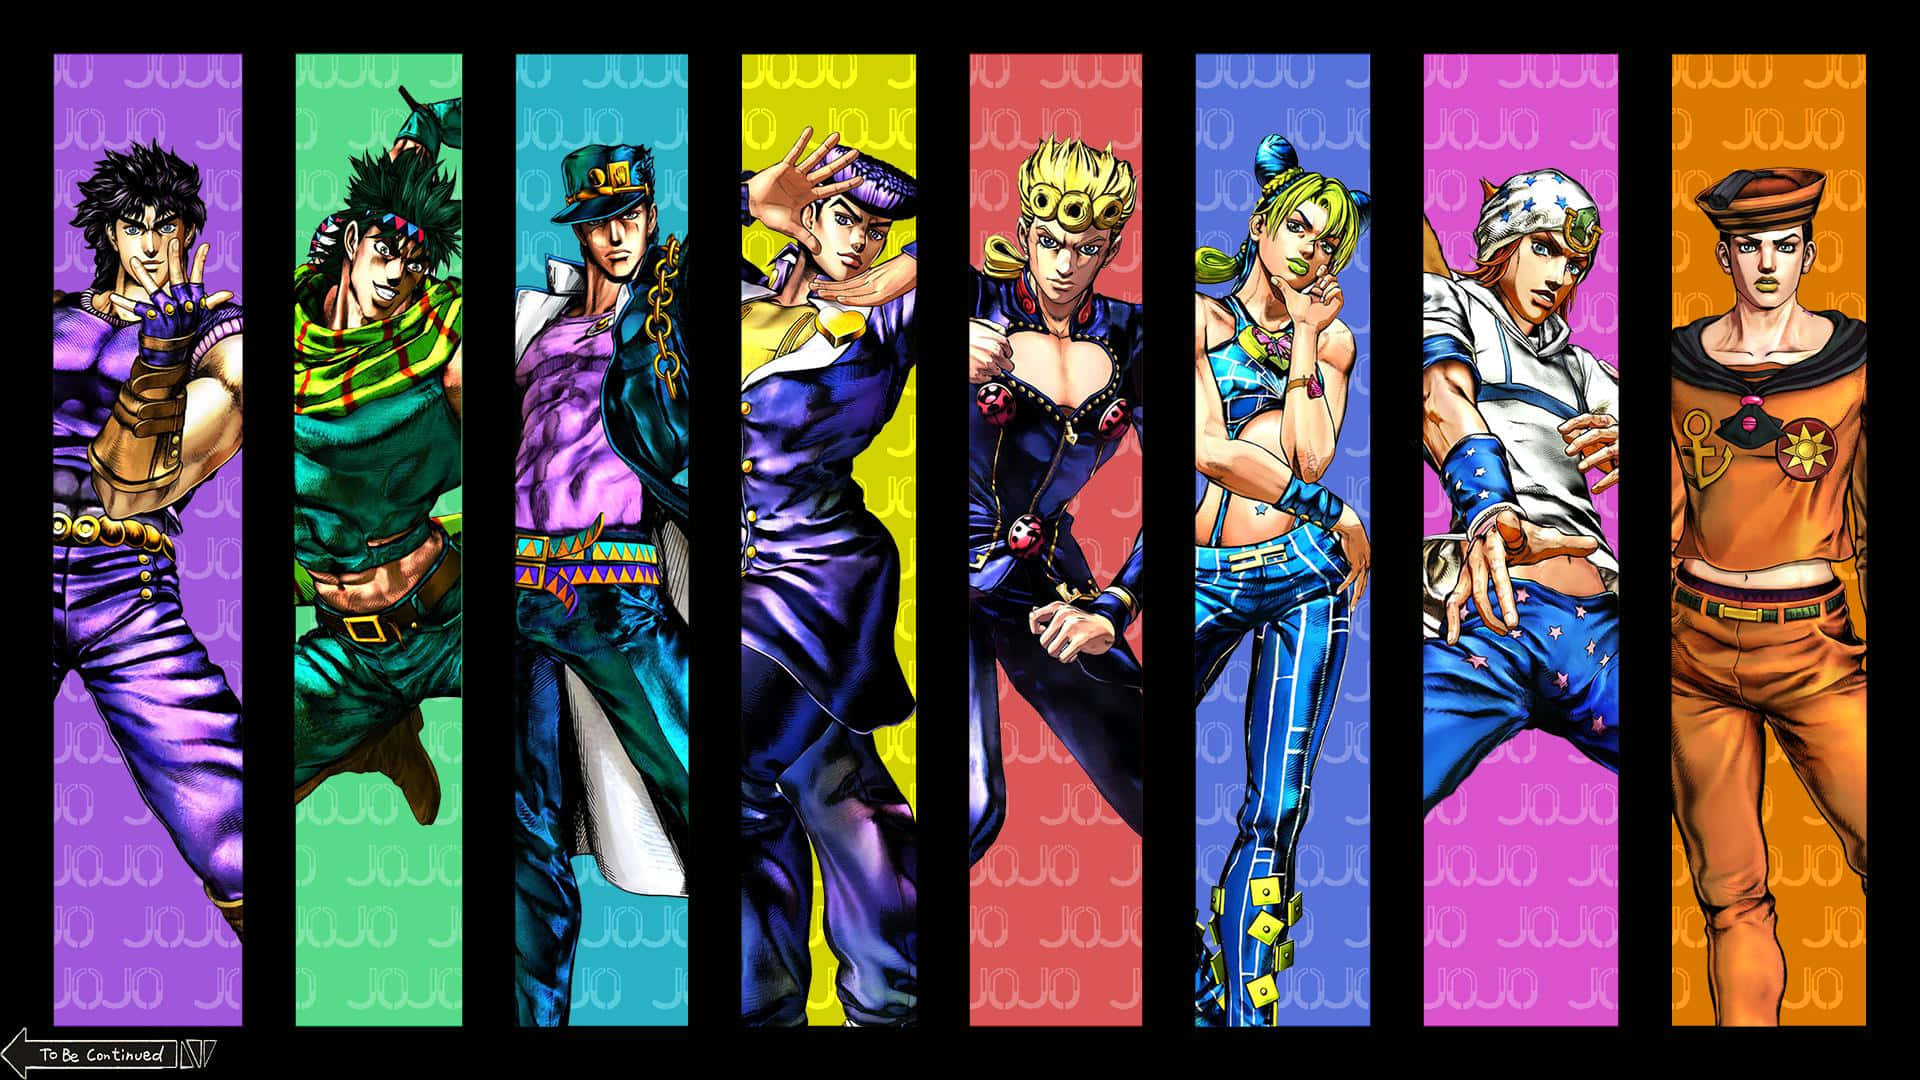 "Stardust Crusaders Face Off Against The Superstar Villains"